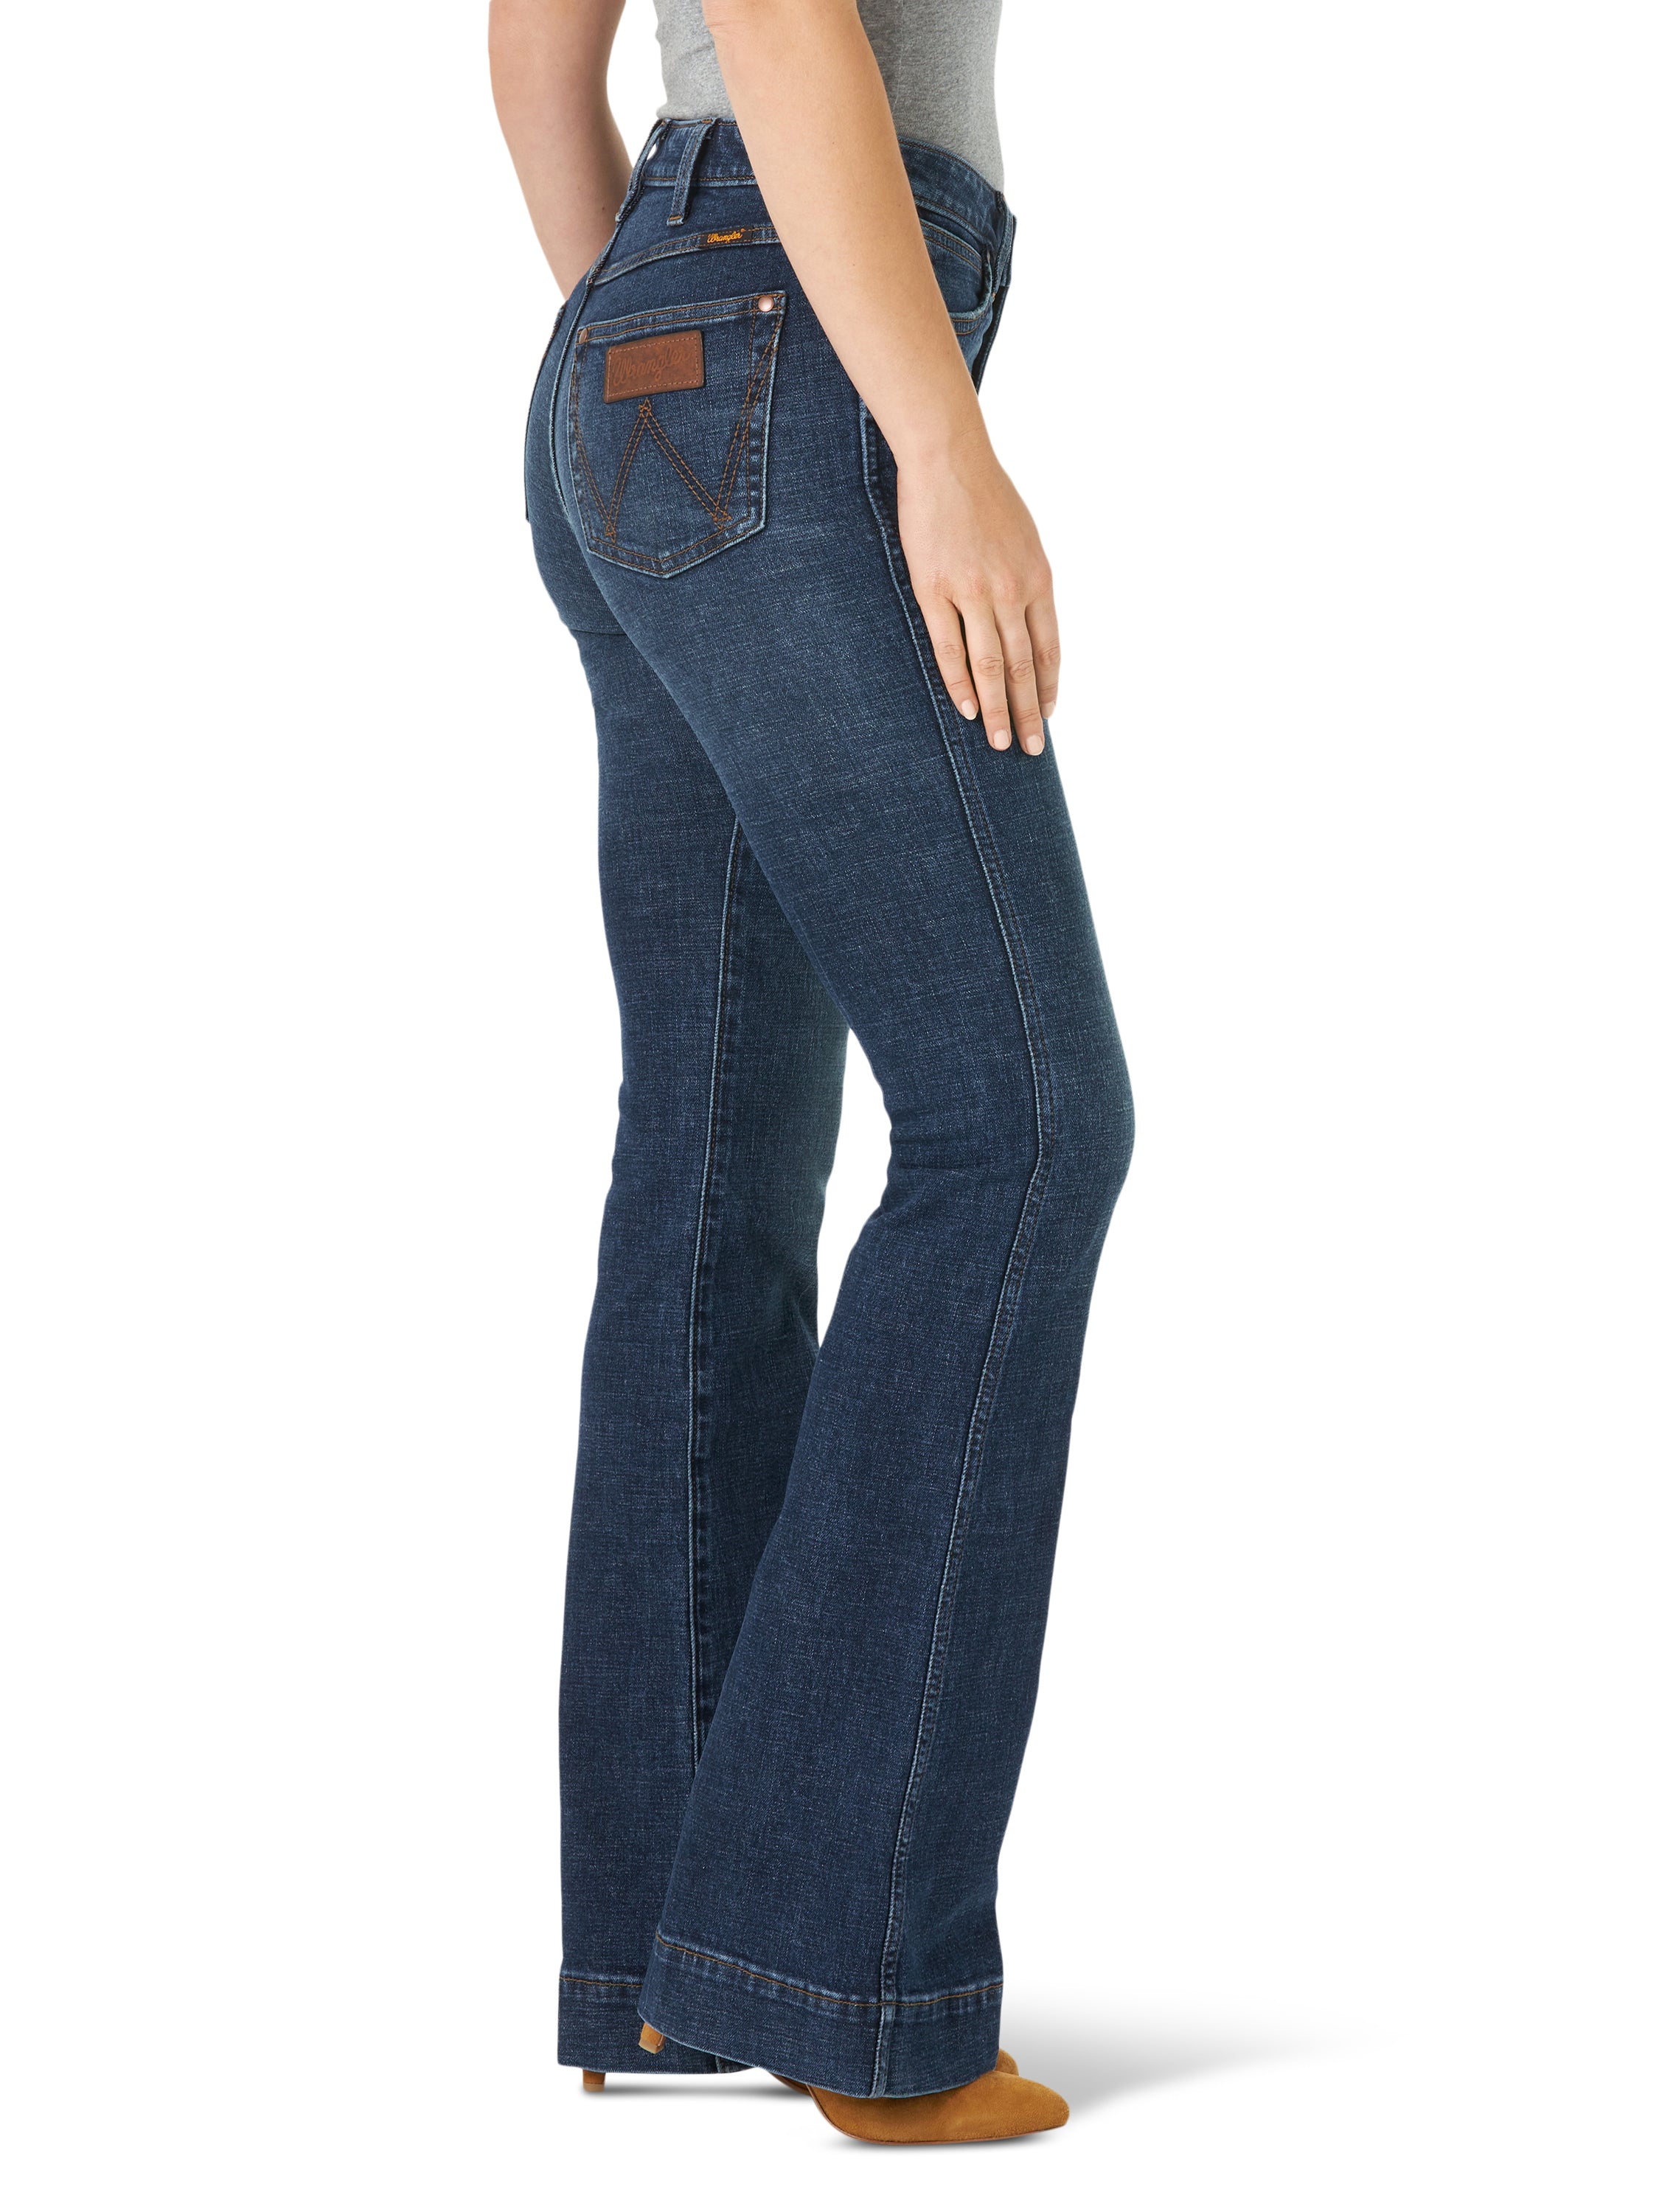 Jeans for Women Online at Best Prices - Westside